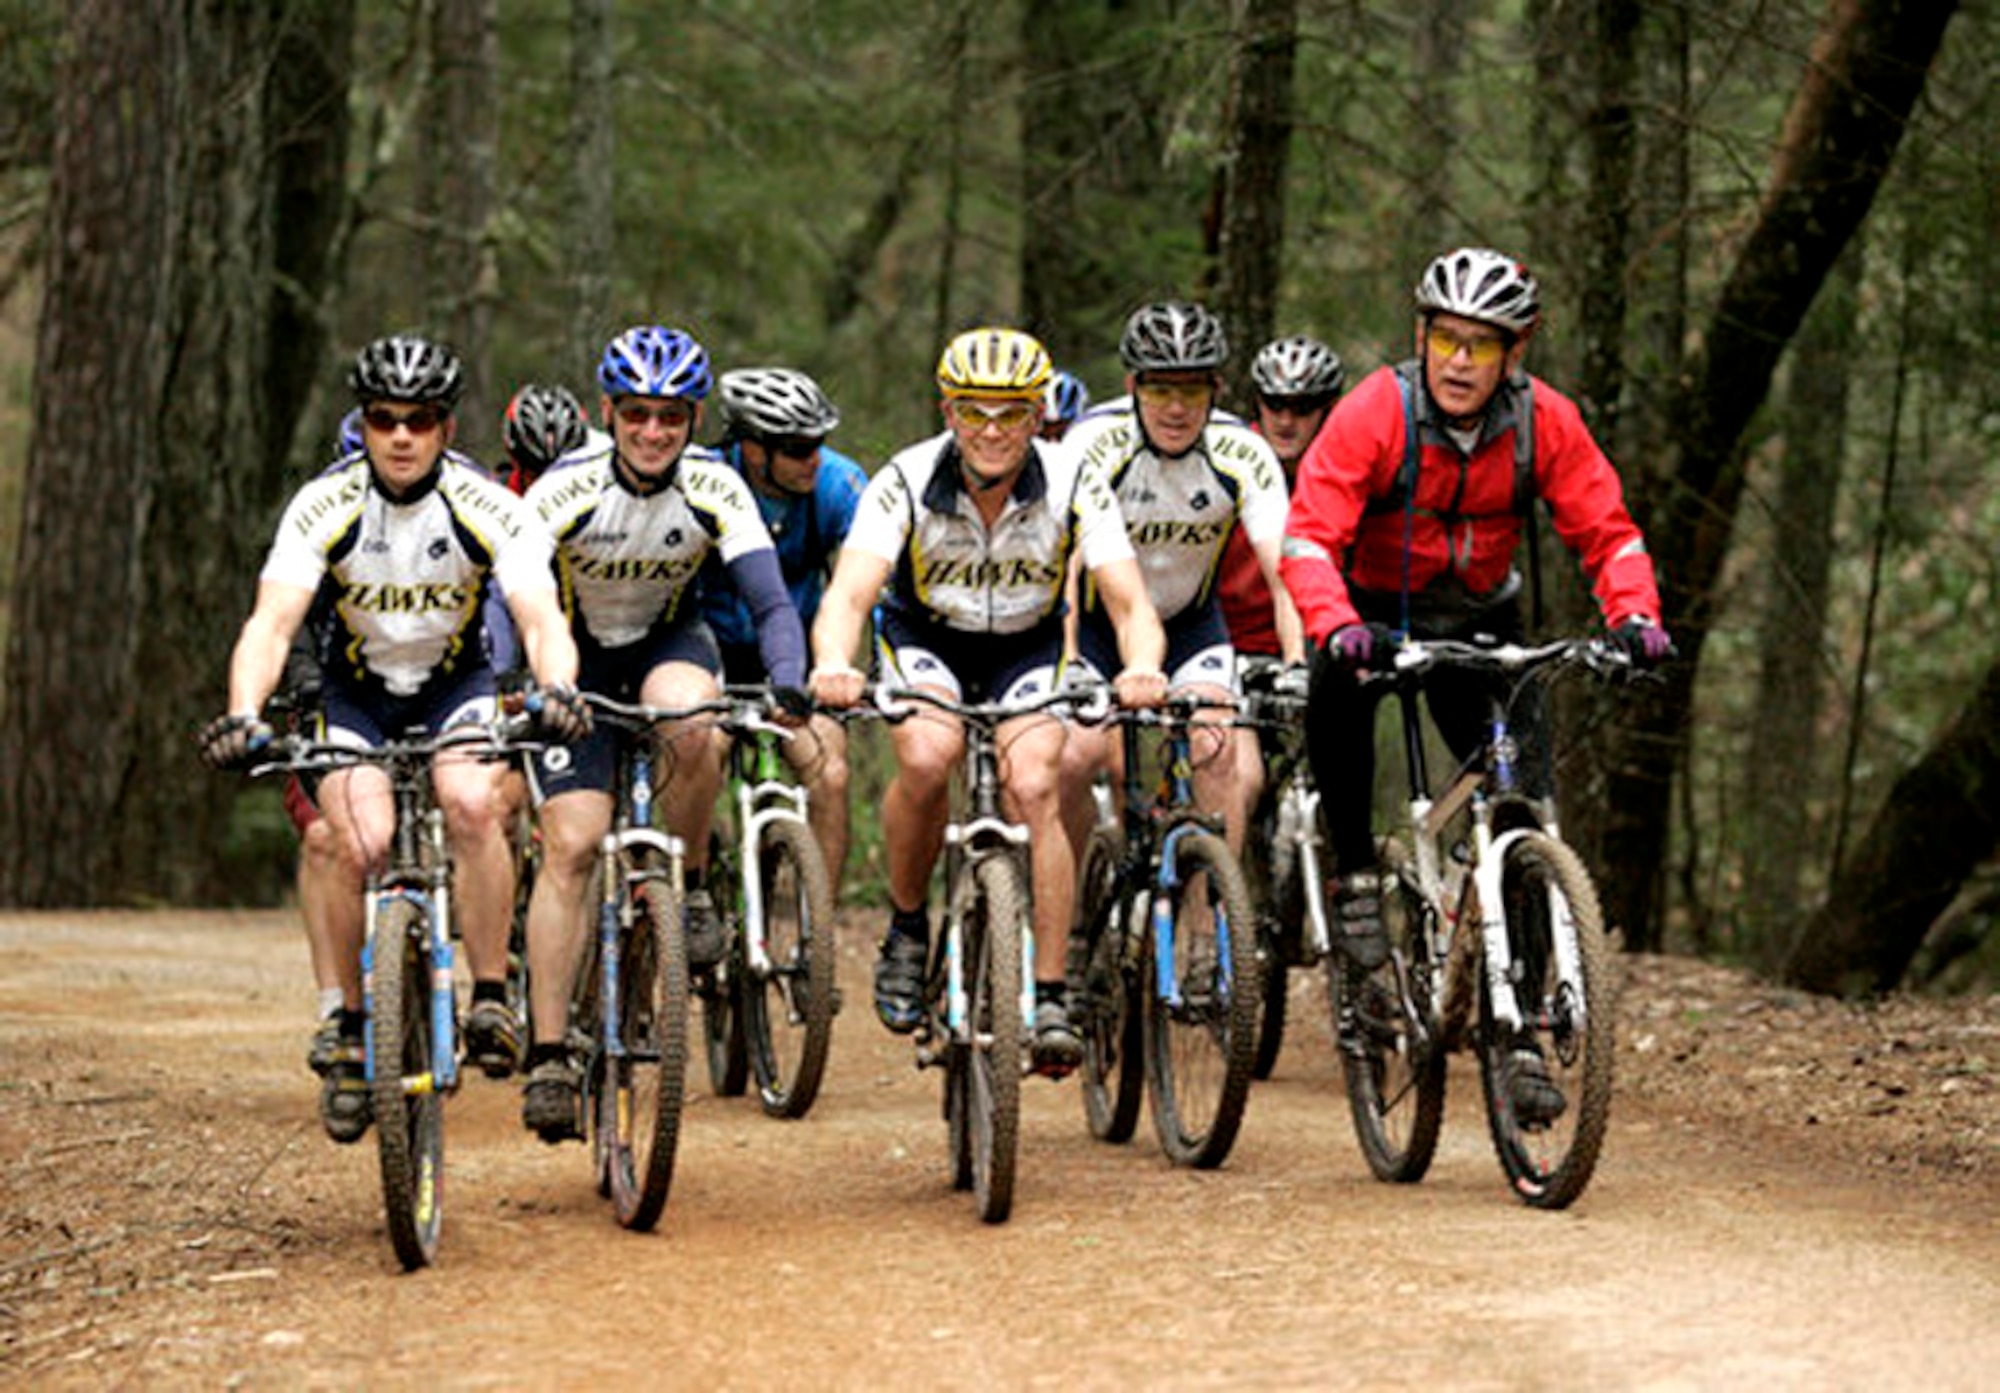 (Left to right) Staff Sgt. Dustin Diede, Capt. James Weinstein, 1st Lt. Barton Boma and Staff Sgt. Brian Young, ride alongside President George W. Bush on a trail in Napa Valley on Saturday, April 22, 2006. The president invited the four Airmen -- members of the Hawks Mountain Bike Club at Travis Air Force Base, Calif. -- to ride with him during his visit to Northern California. (White House photo/Eric Draper)
